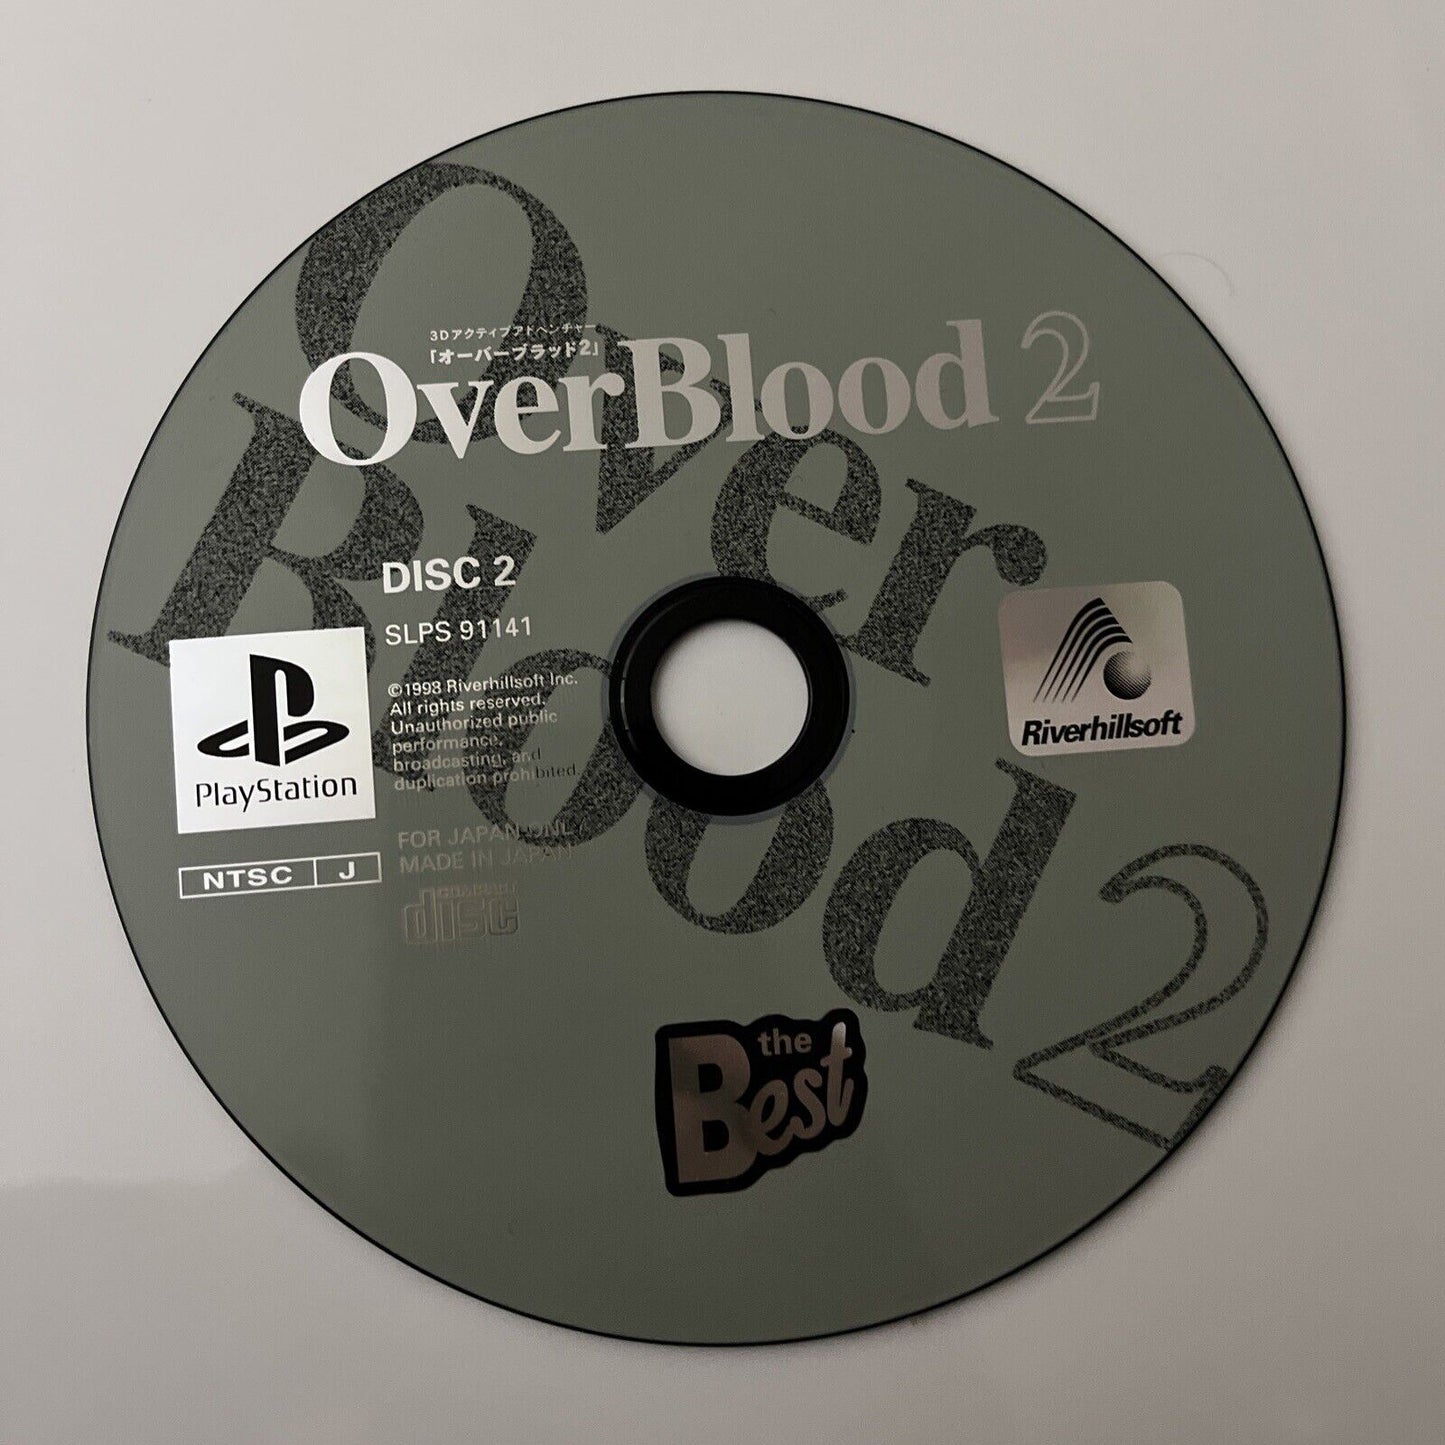 Overblood 2 - Sony PlayStation PS1 NTSC-J JAPAN Survival Horror 1997 Game